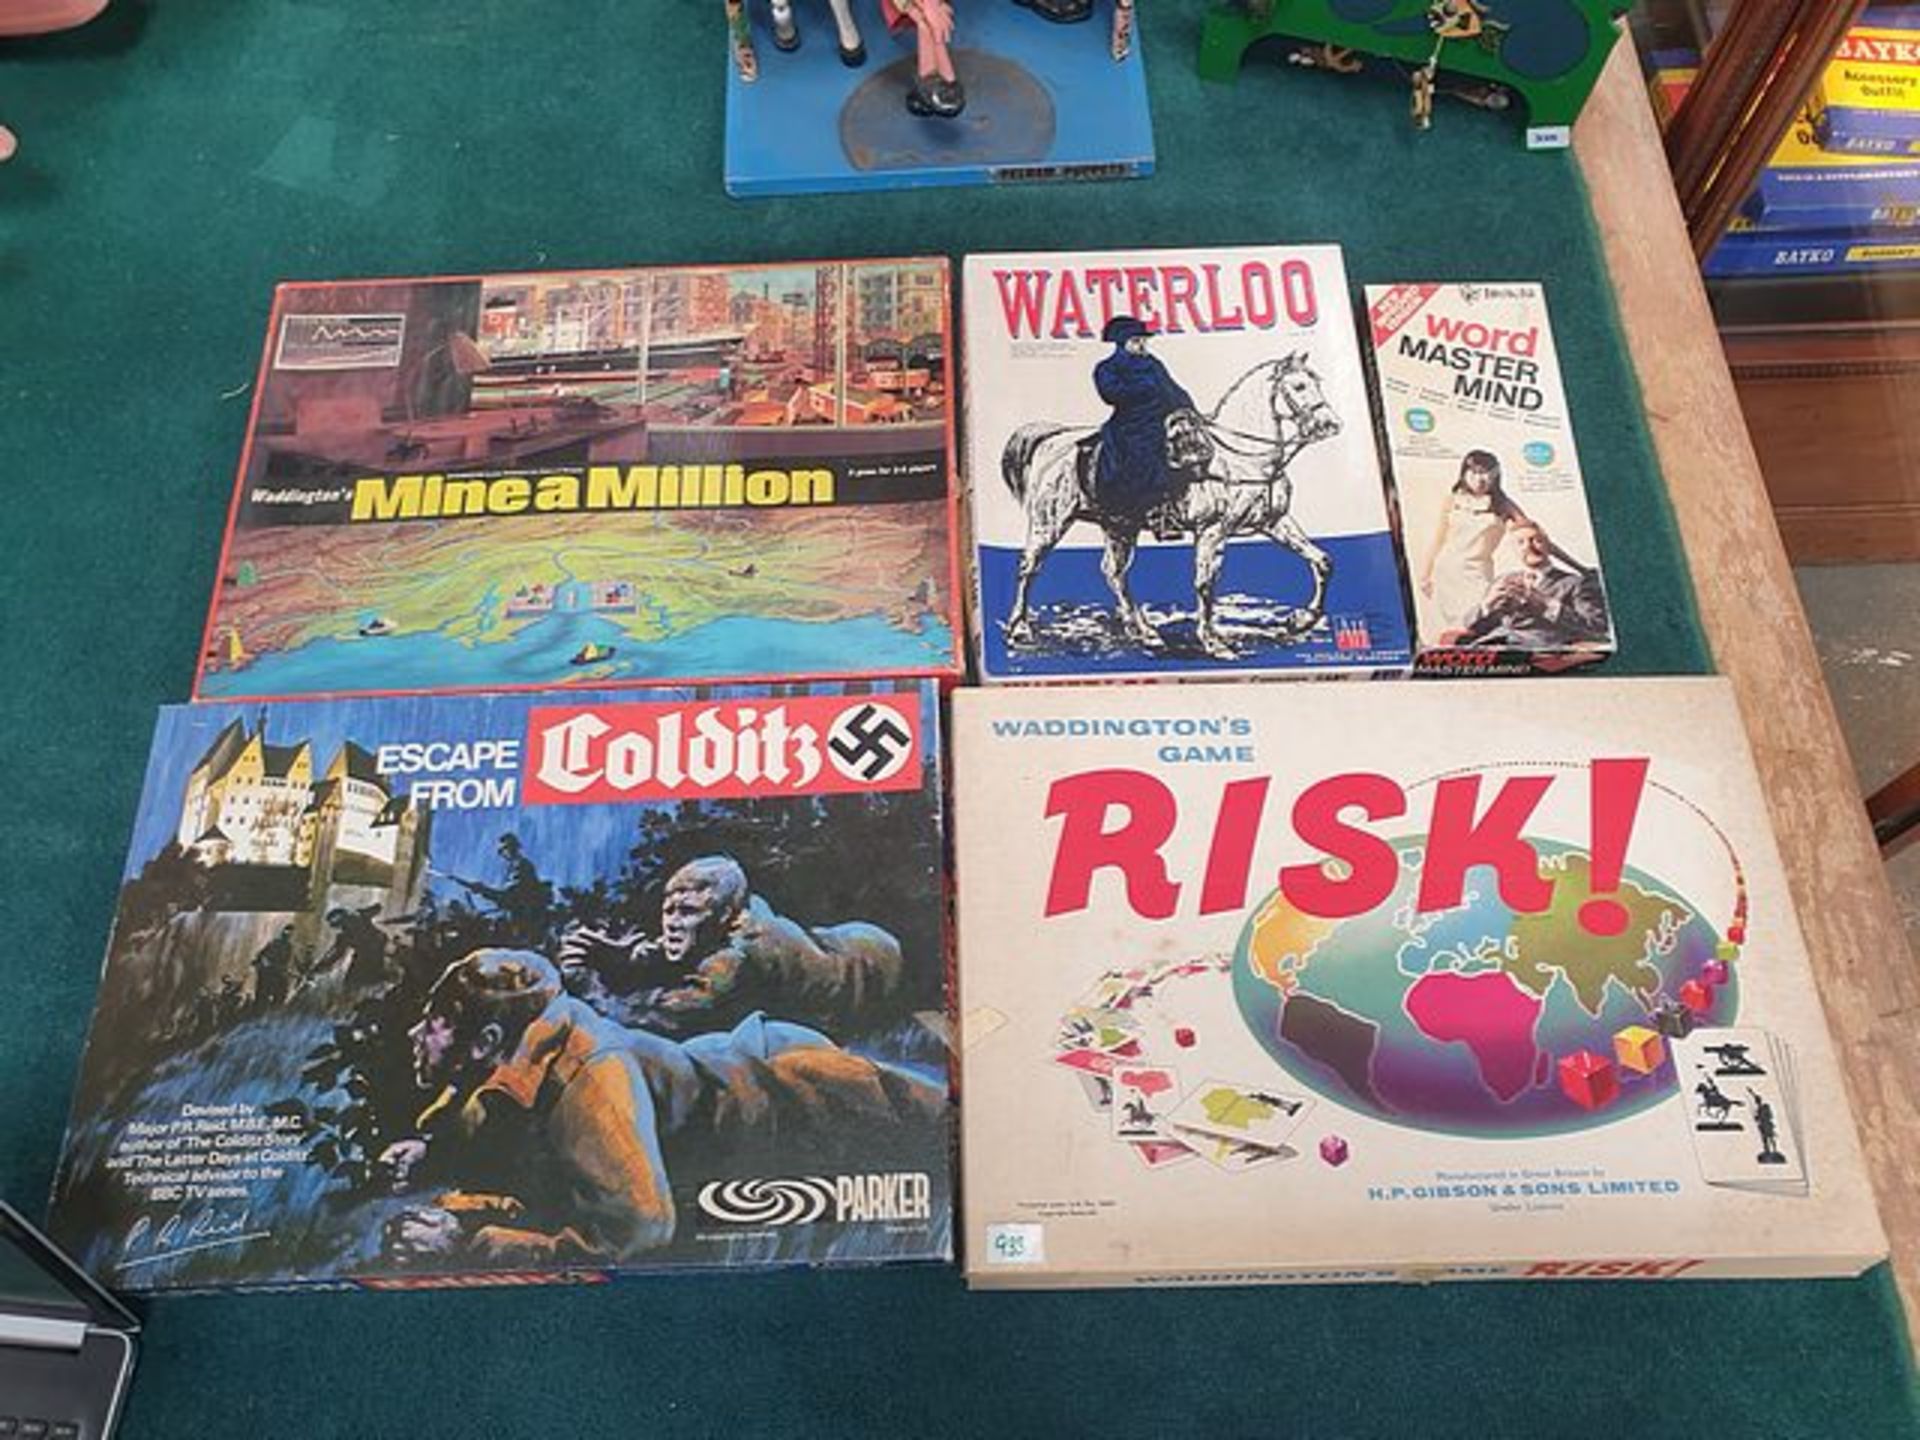 5 X Board Games Comprising Of; Word Master Mind, Waterloo Napoleonic Campaign Game, Mine A